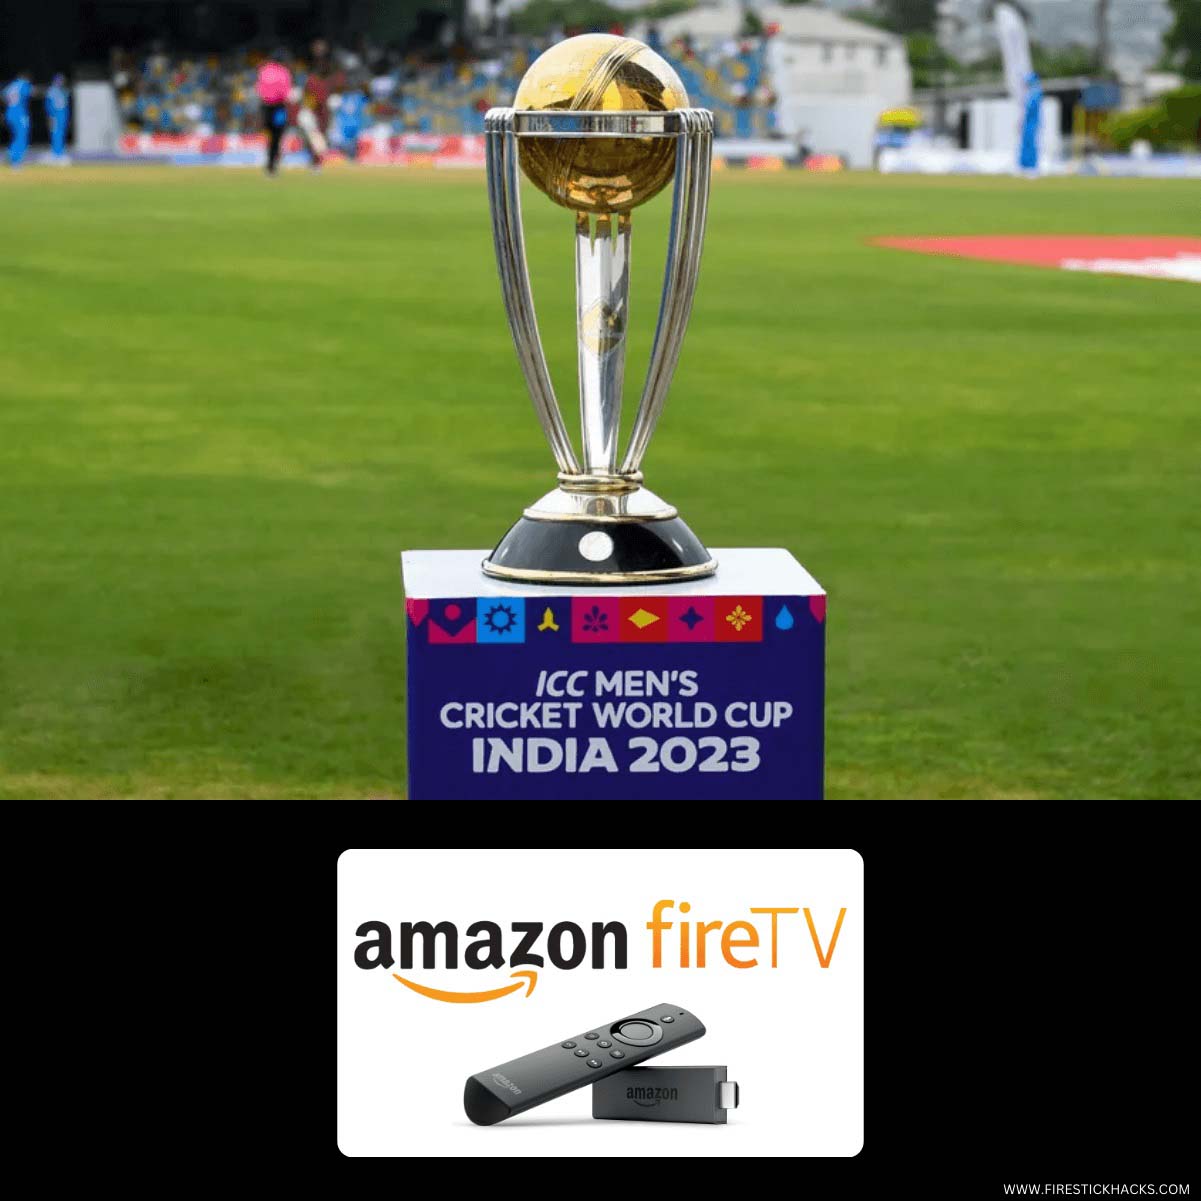 How to Watch ICC Cricket World Cup 2023 on Firestick For Free